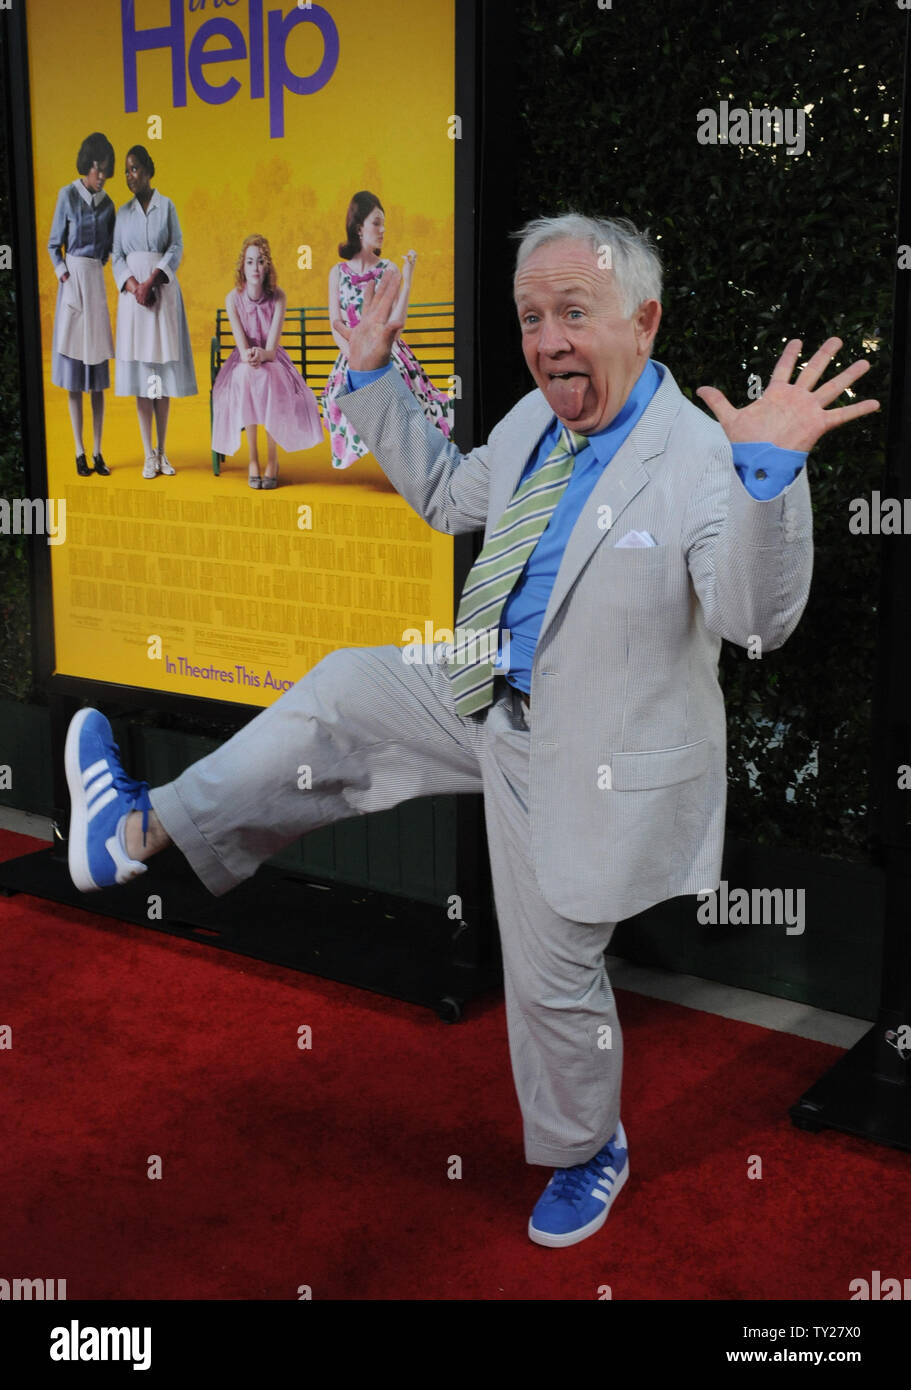 Leslie Jordan, a cast member in the motion picture drama "The Help",  attends the premiere of the film at the Academy of Motion Picture Arts and  Sciences in Beverly Hills, California on